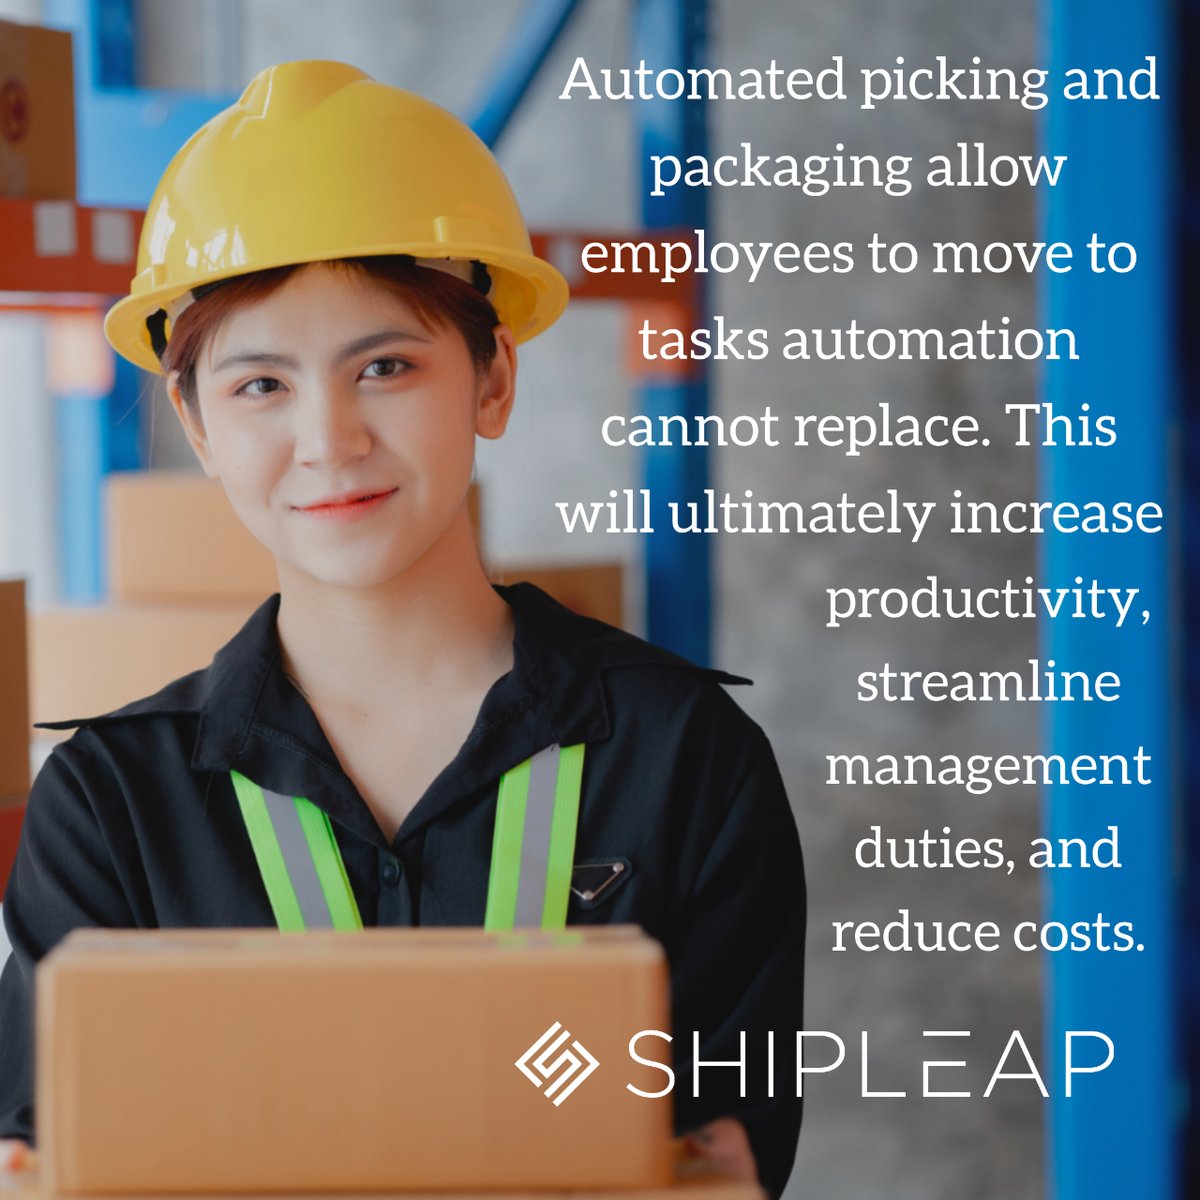 Even if your operation can’t benefit from an automated picking and packing system, it can still reap the rewards of automation 📦 #shippingsoftware #shippingindustry #shippingnews #parcelshipping #parcels #parceldelivery #smartshipping #shipping #technology #automation